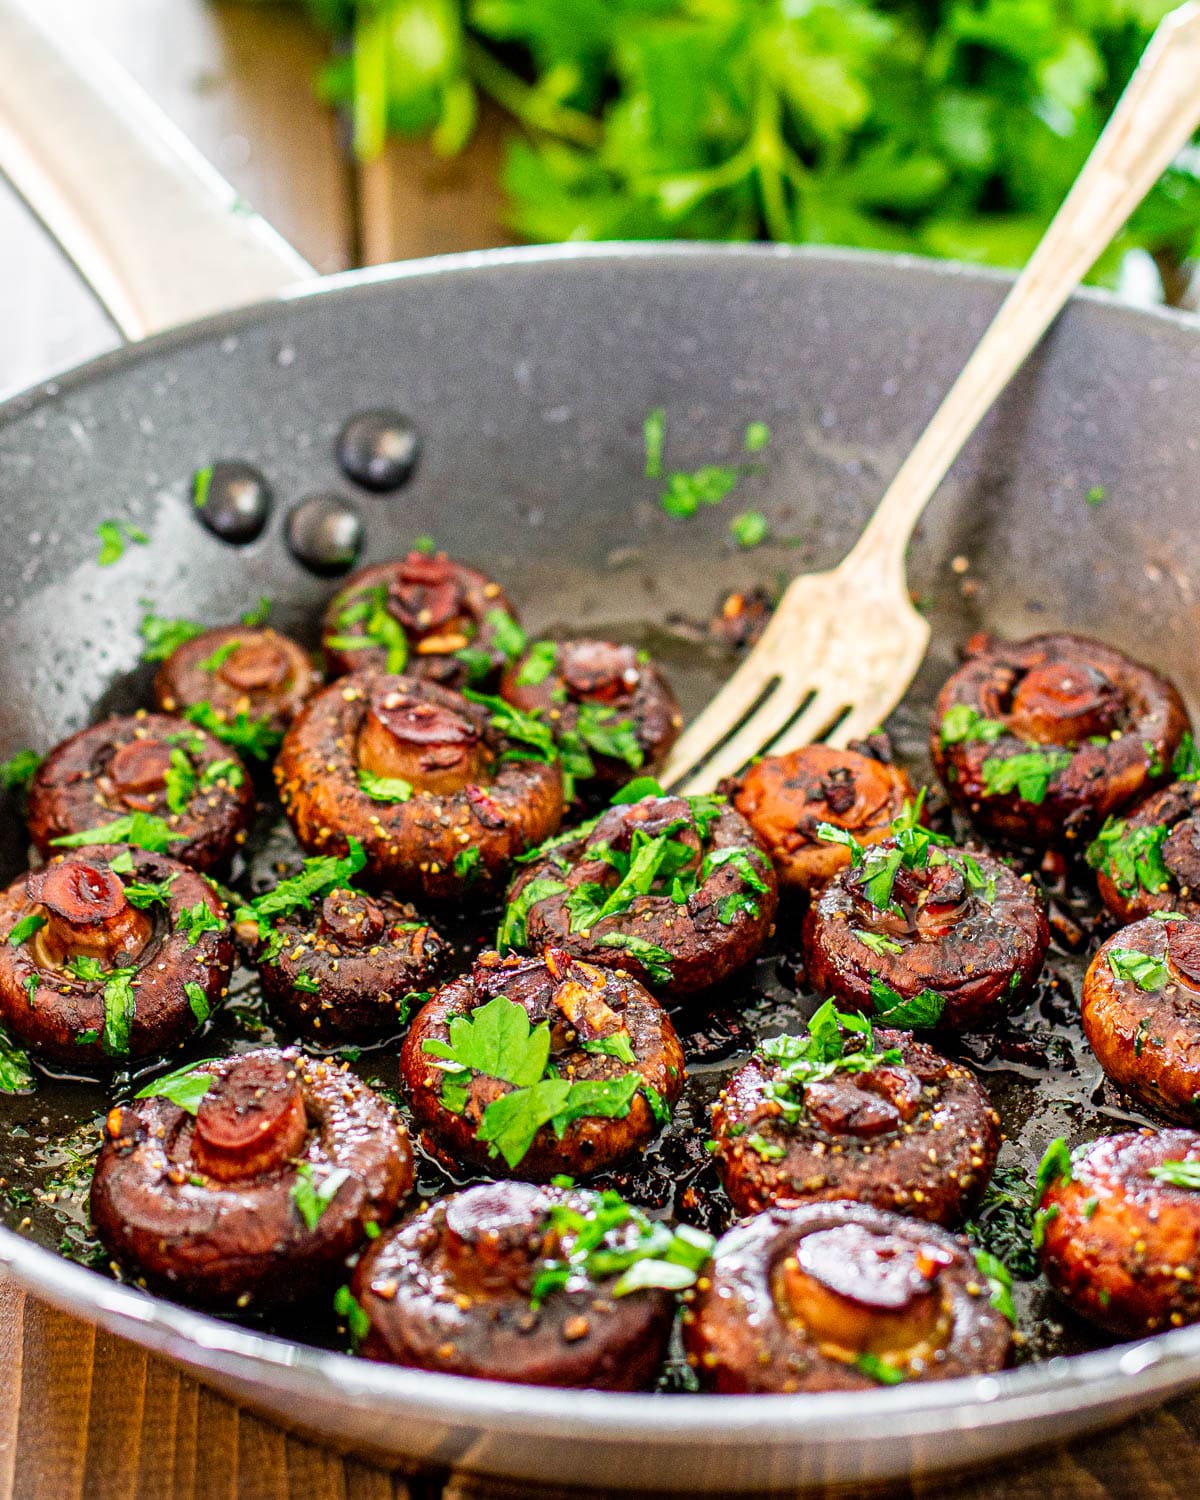 a skillet with sauteed mushrooms in red wine sauce and garnished with parsley